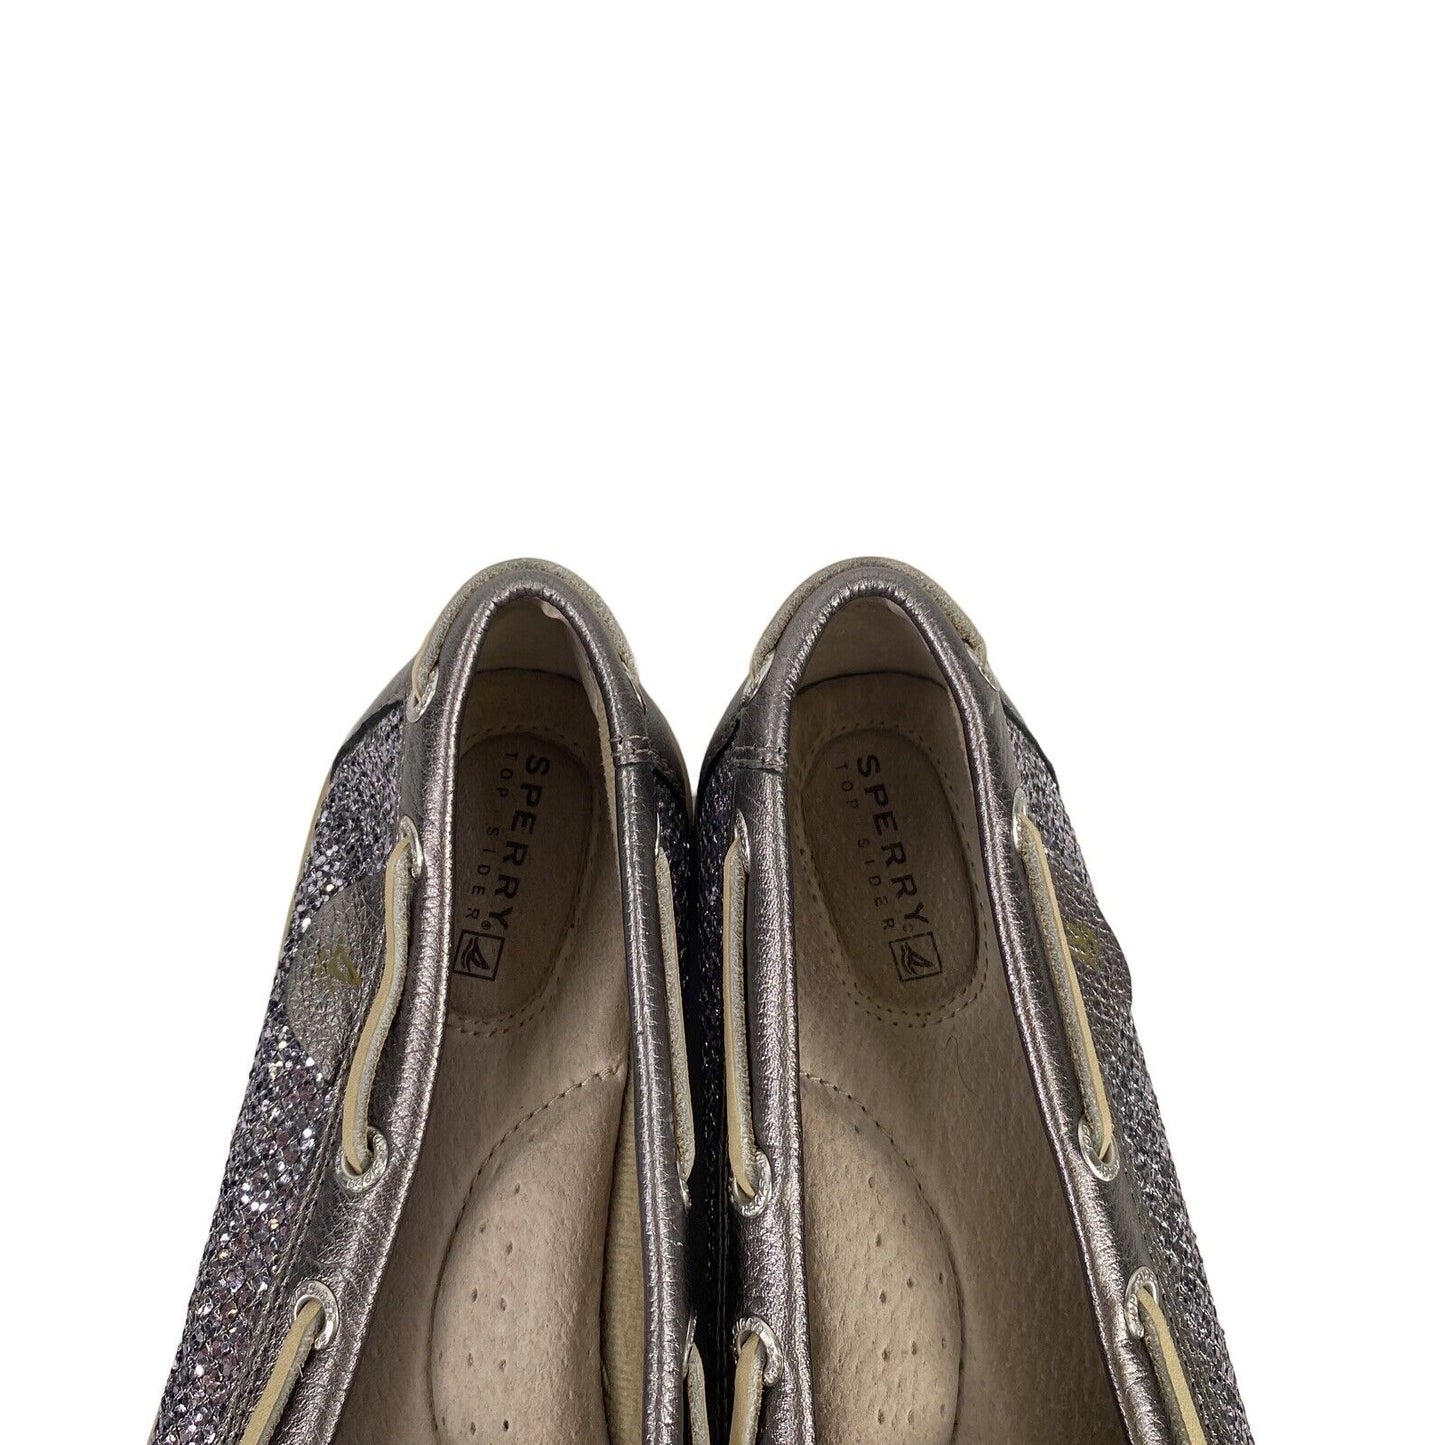 Sperry Women's Silver Glitter Leather Boat Shoes - 7.5 M